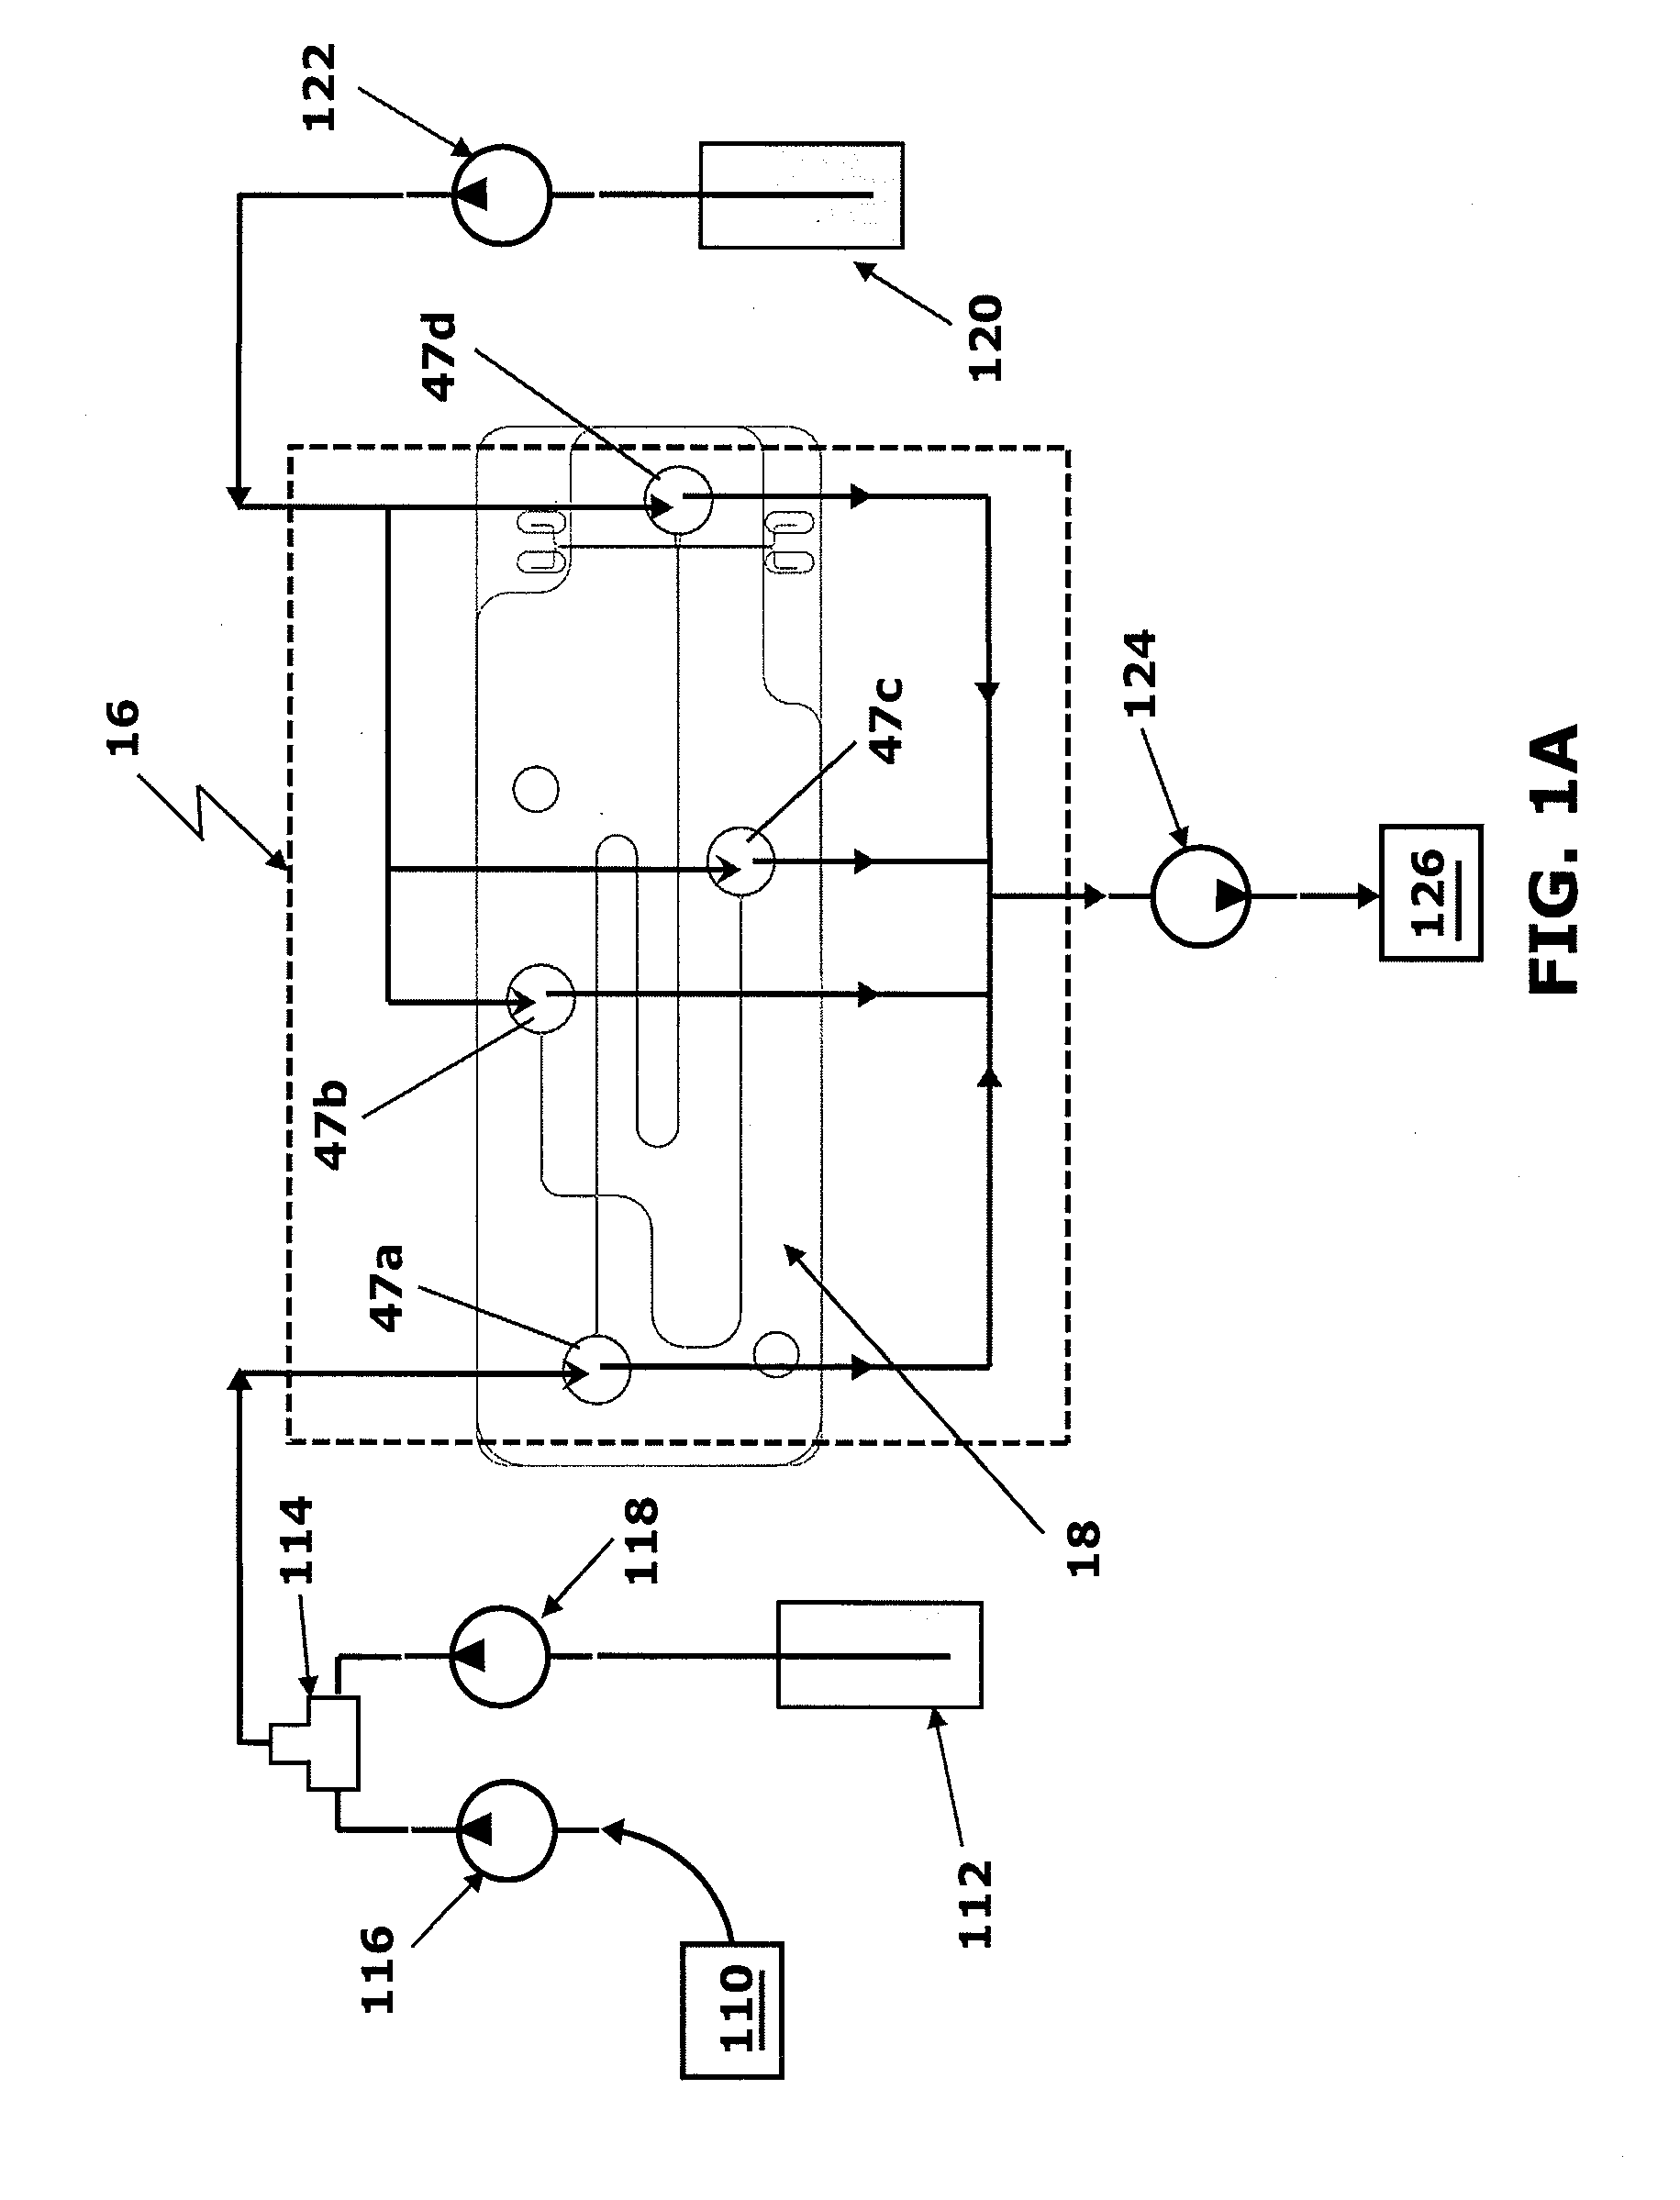 Fluidic and electrical interface for microfluidic chips